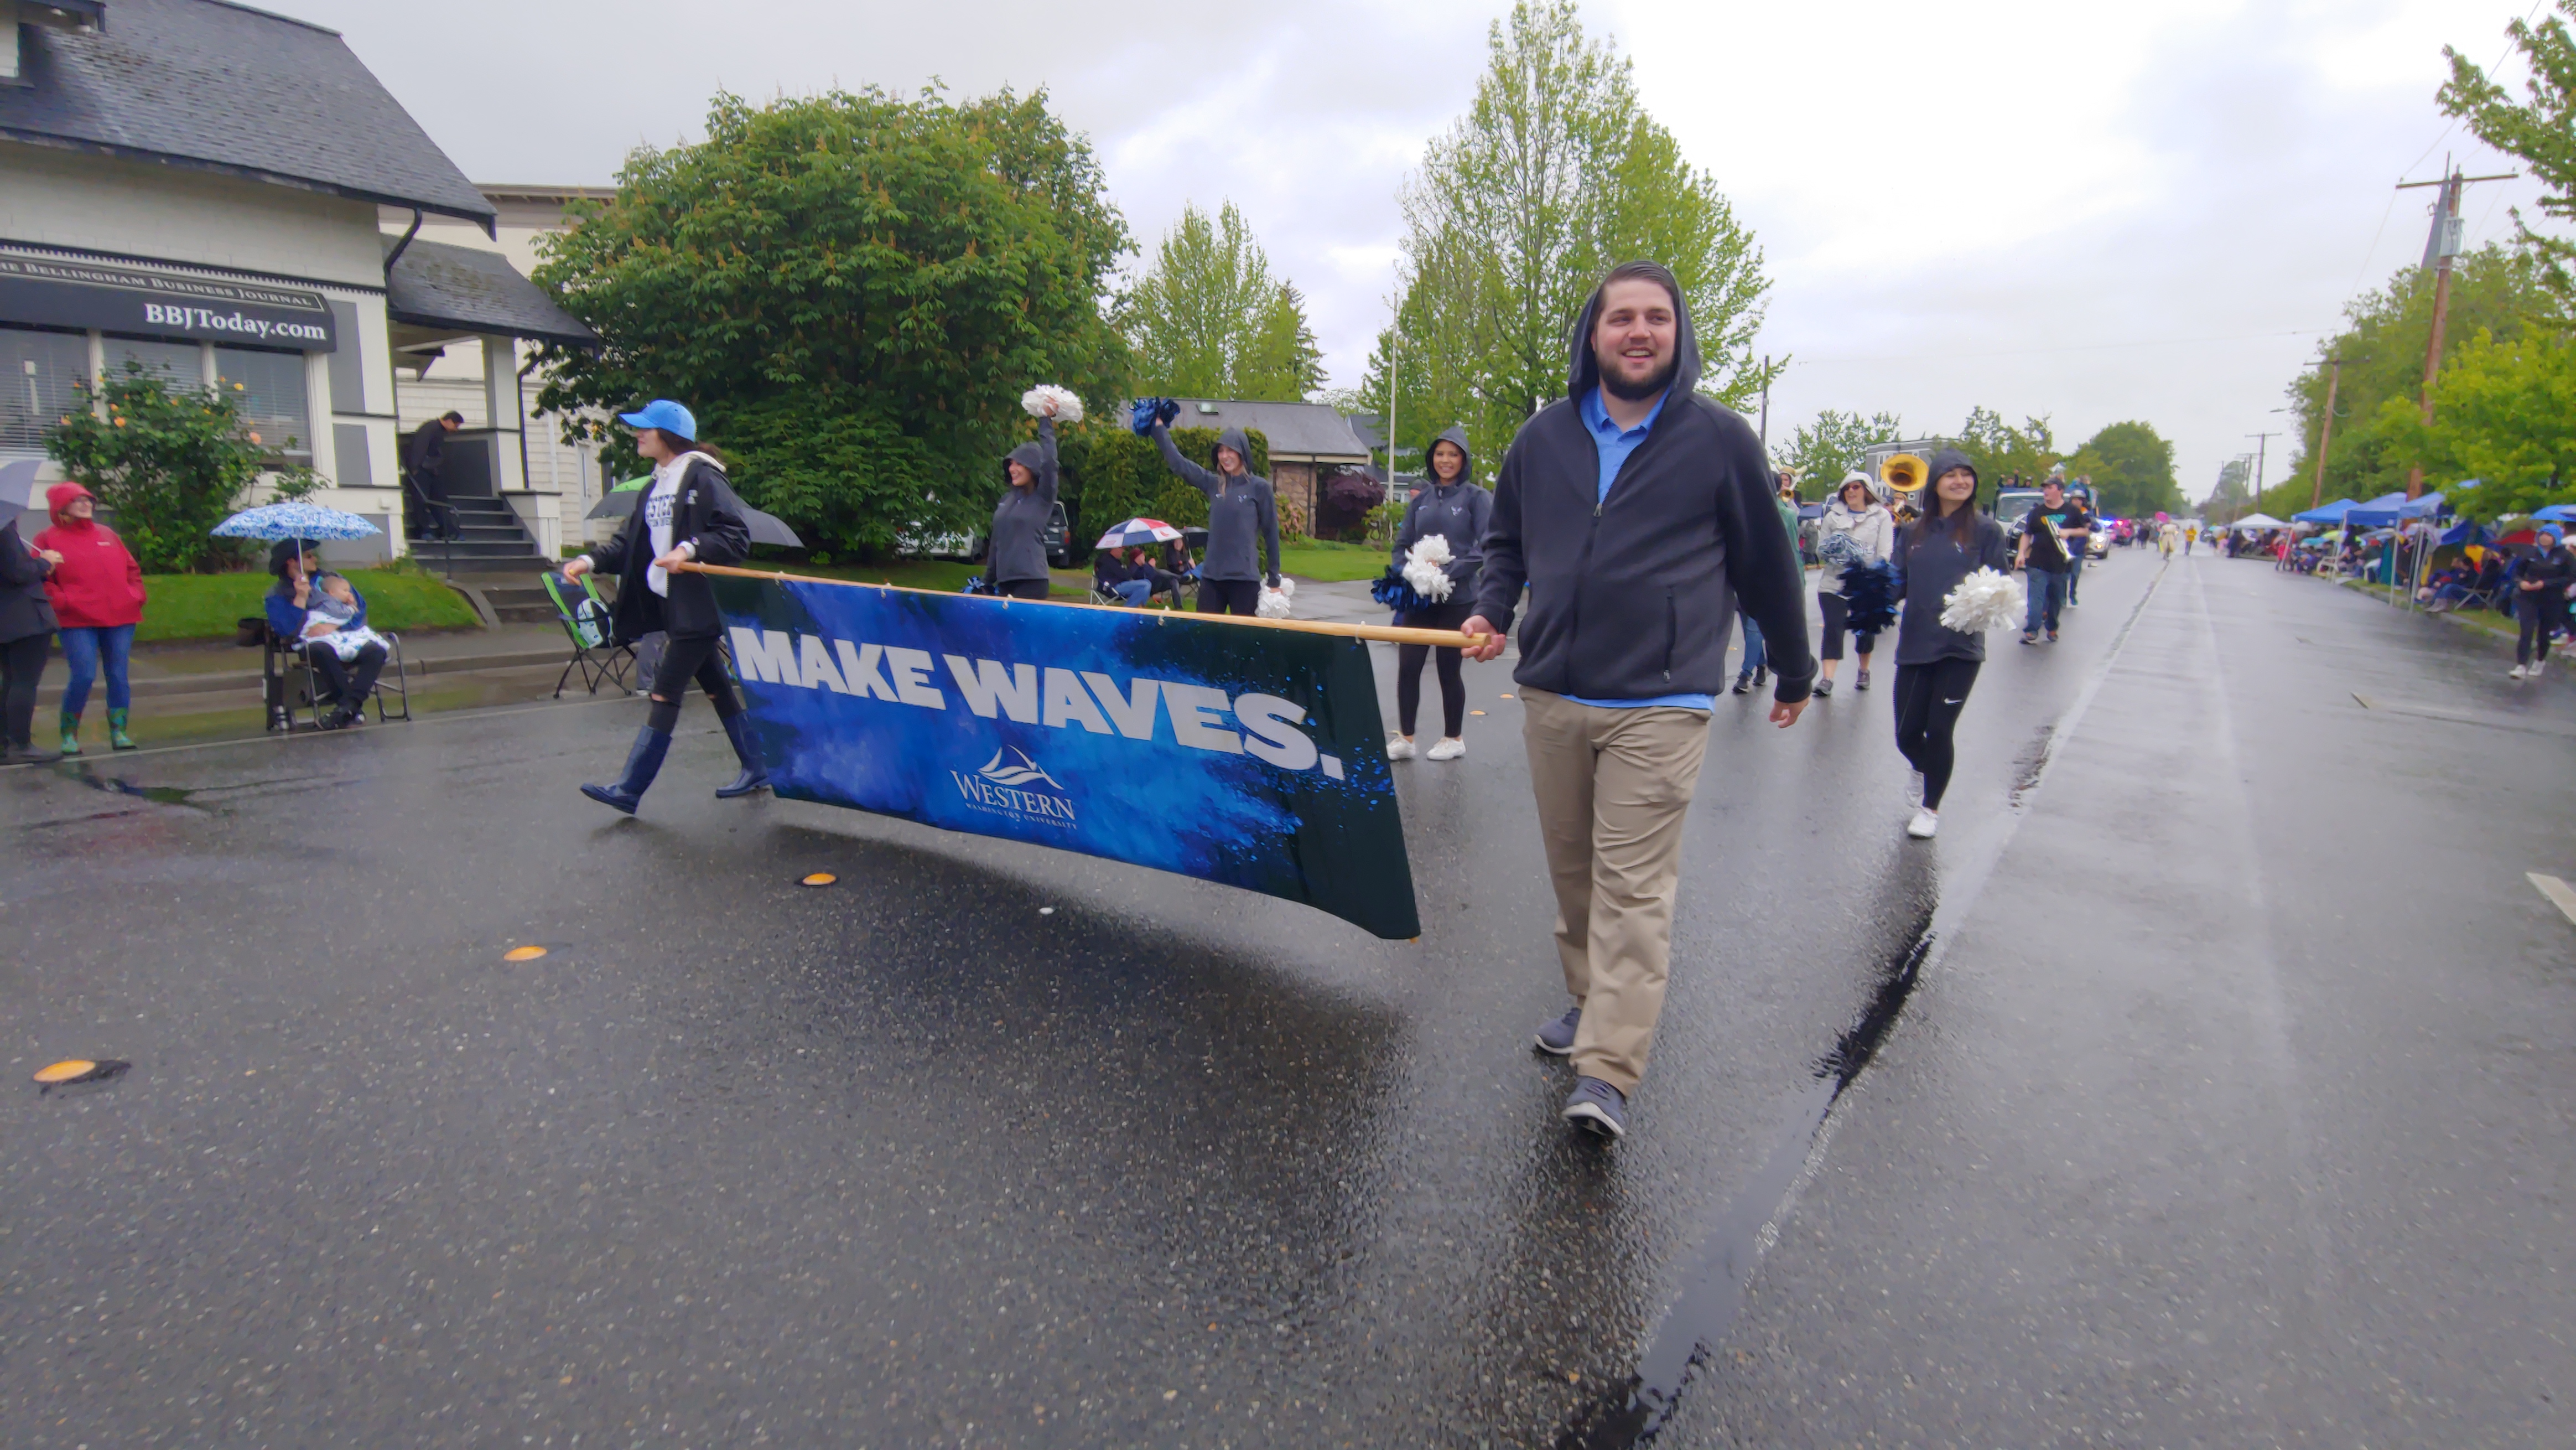 Two people carrying a banner that reads &quot;Make Waves, Western Washington University&quot; lead several people in a parade down the middle of Cornwall Avenue as people holding umbrellas watch from the sides